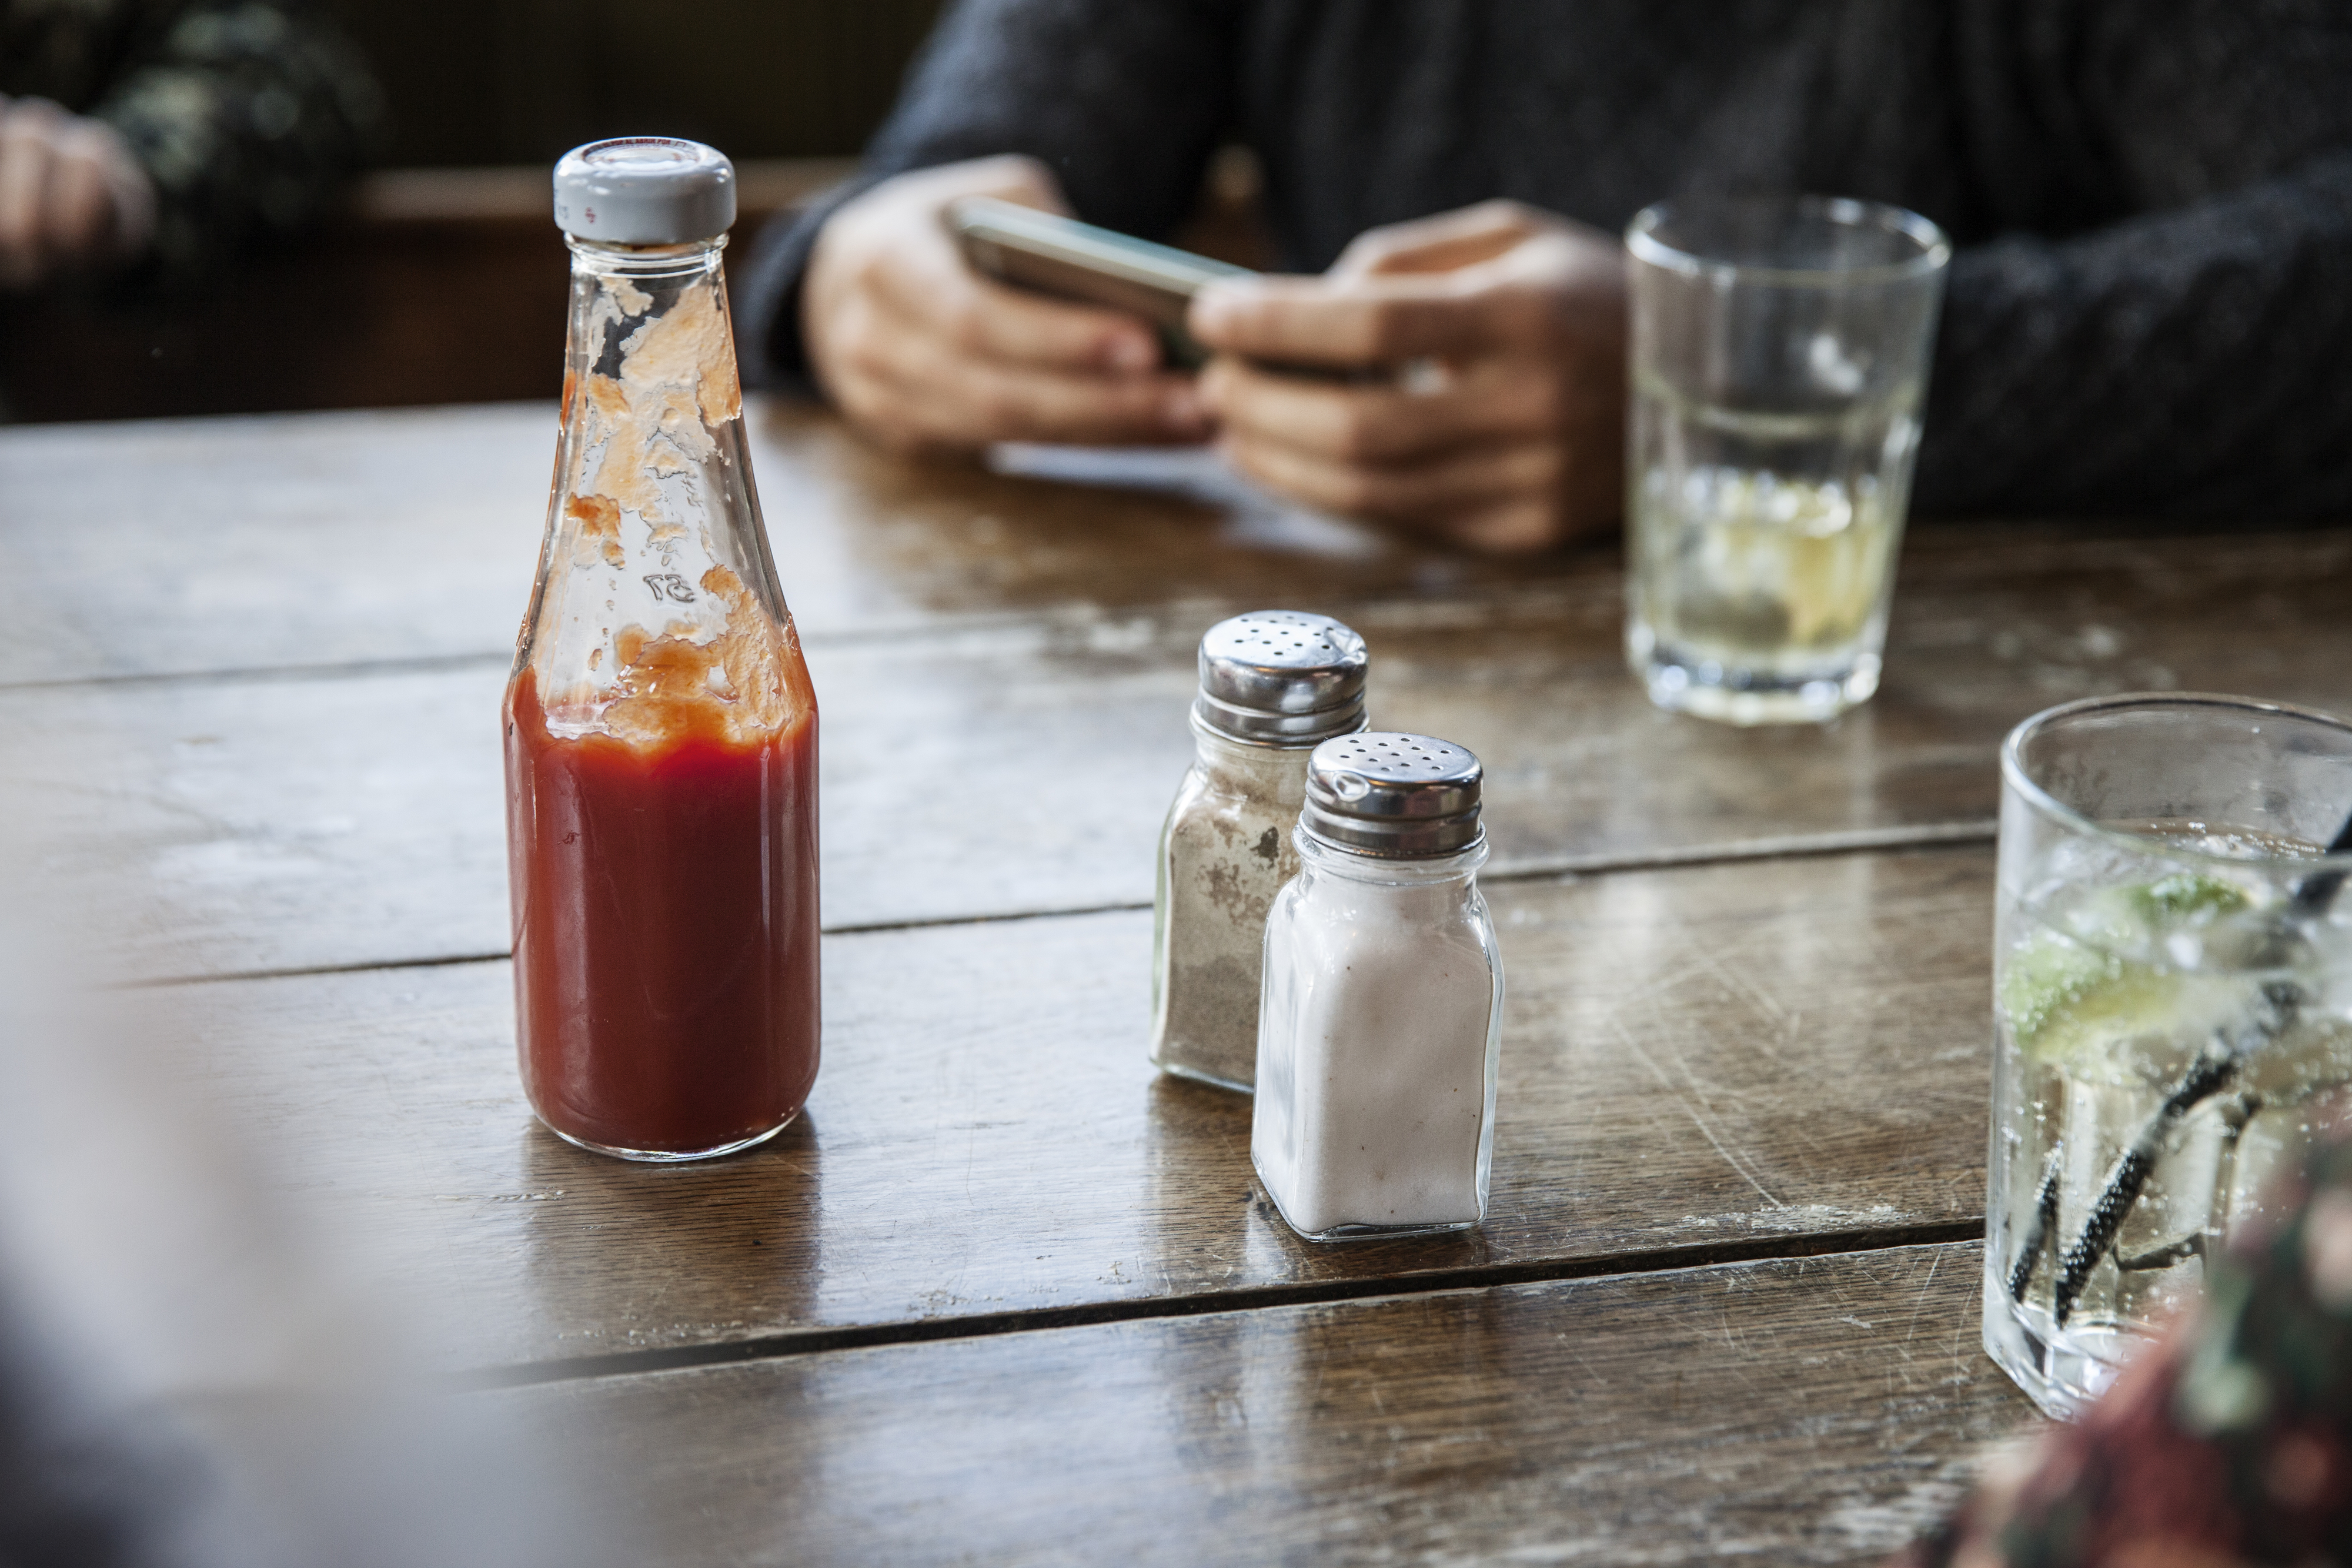 Person at a table with condiment bottles, casually checking their phone